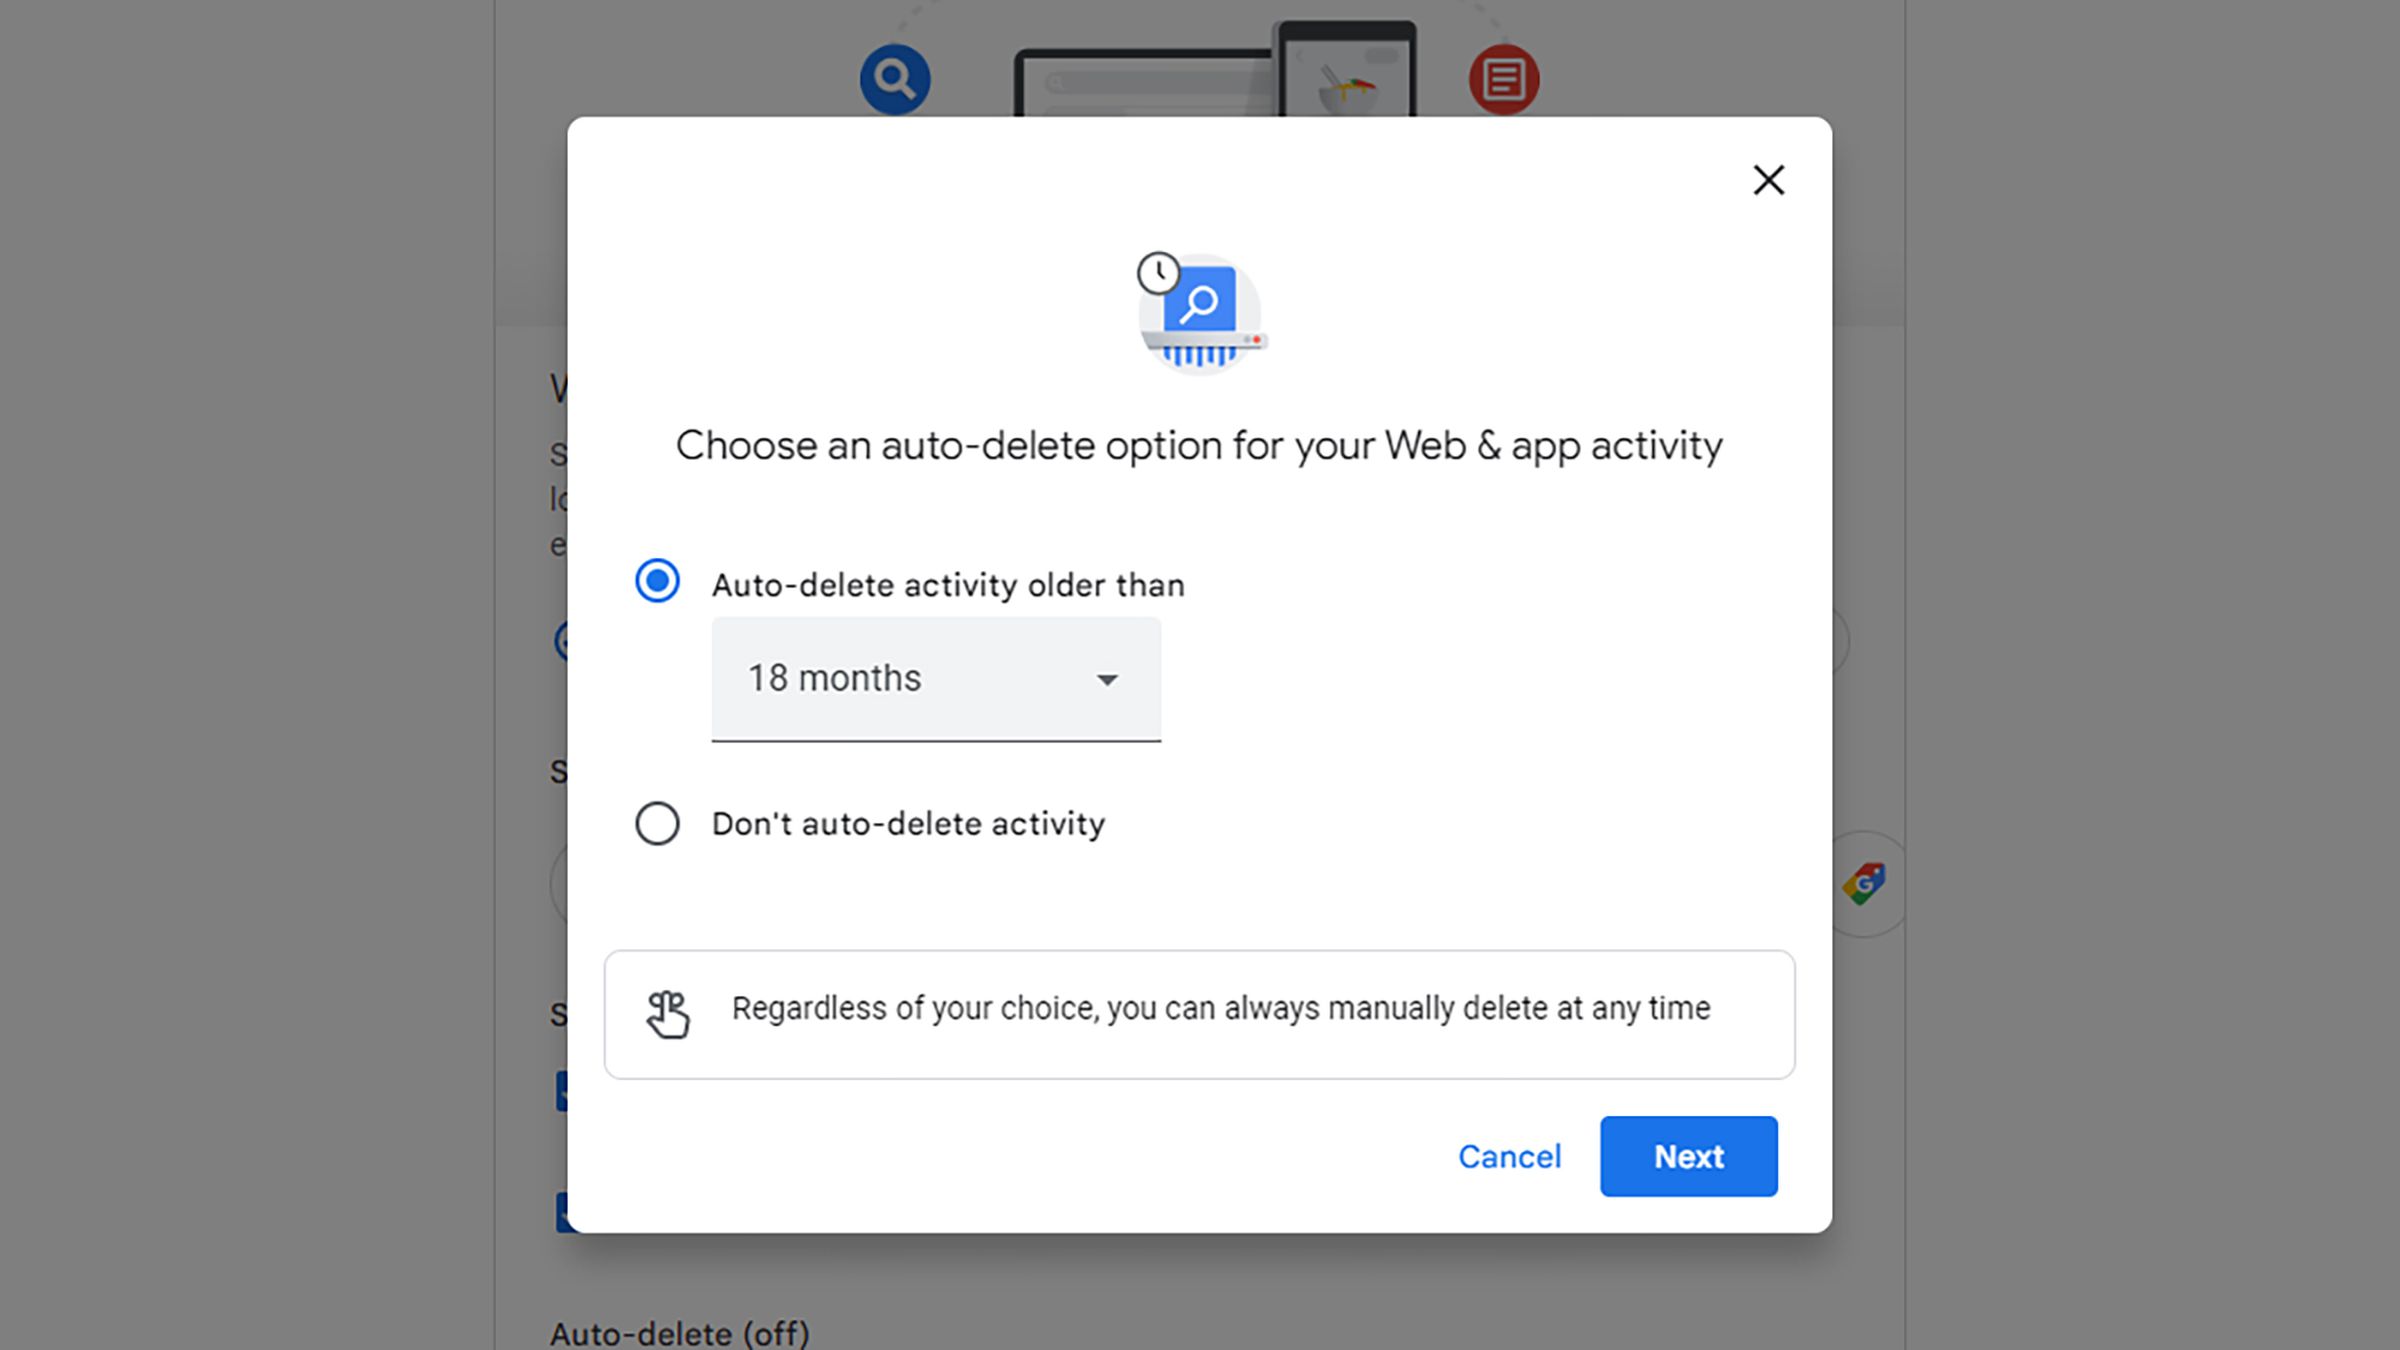 Pop-up window headed “Choose an auto-delete option for your Web &amp; app activity.”